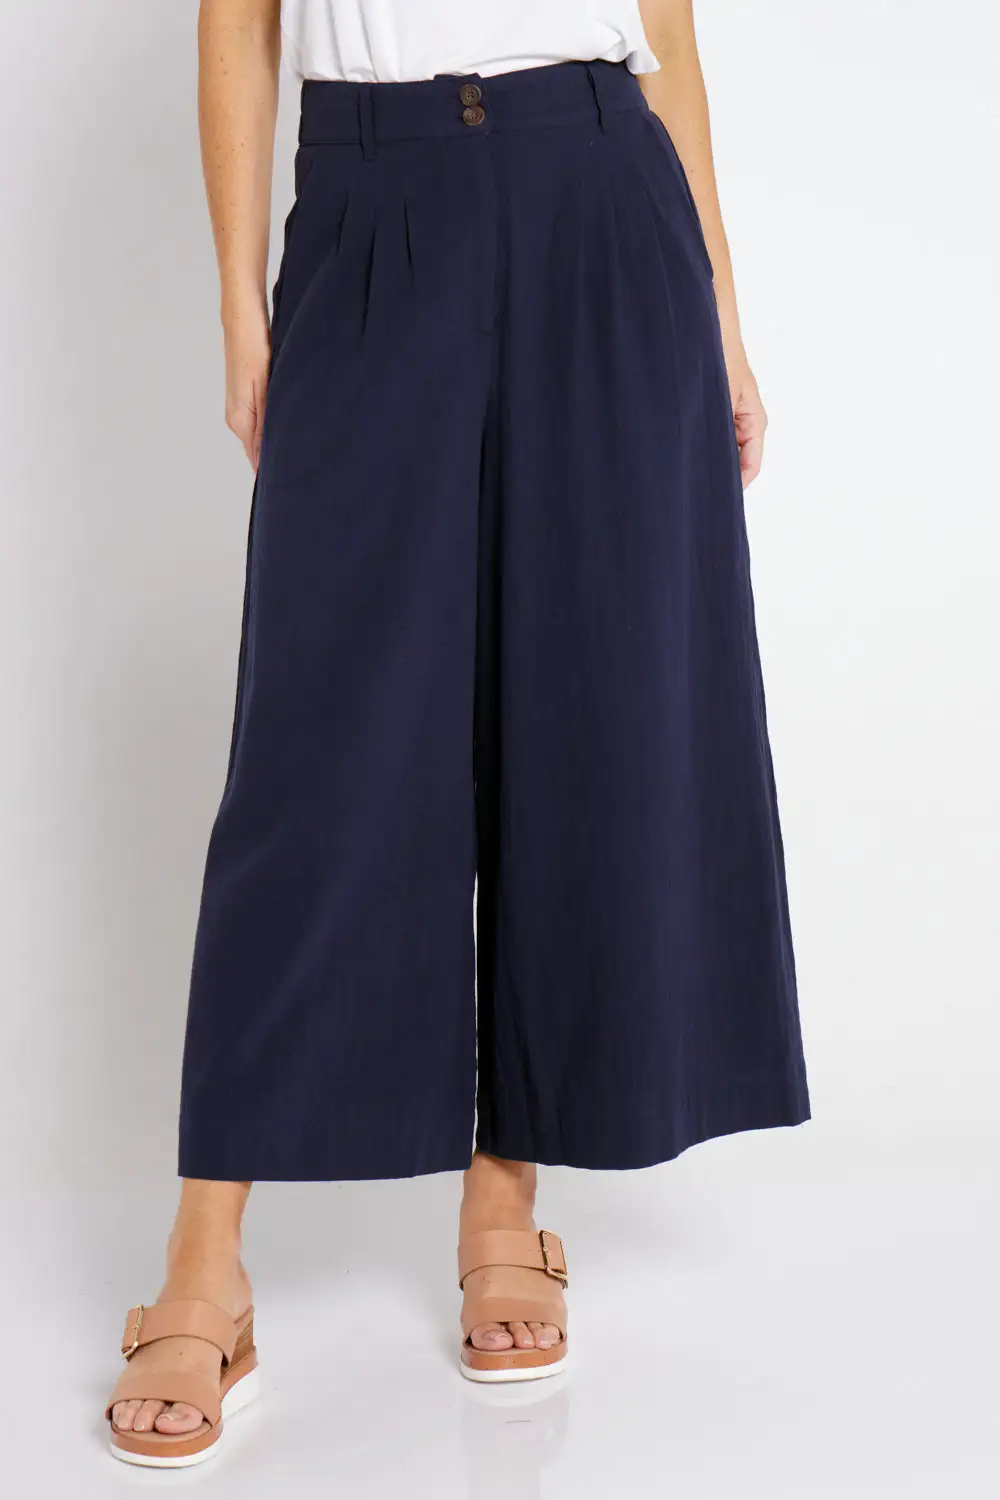 Jetta Upcycled Cotton Culottes - Navy